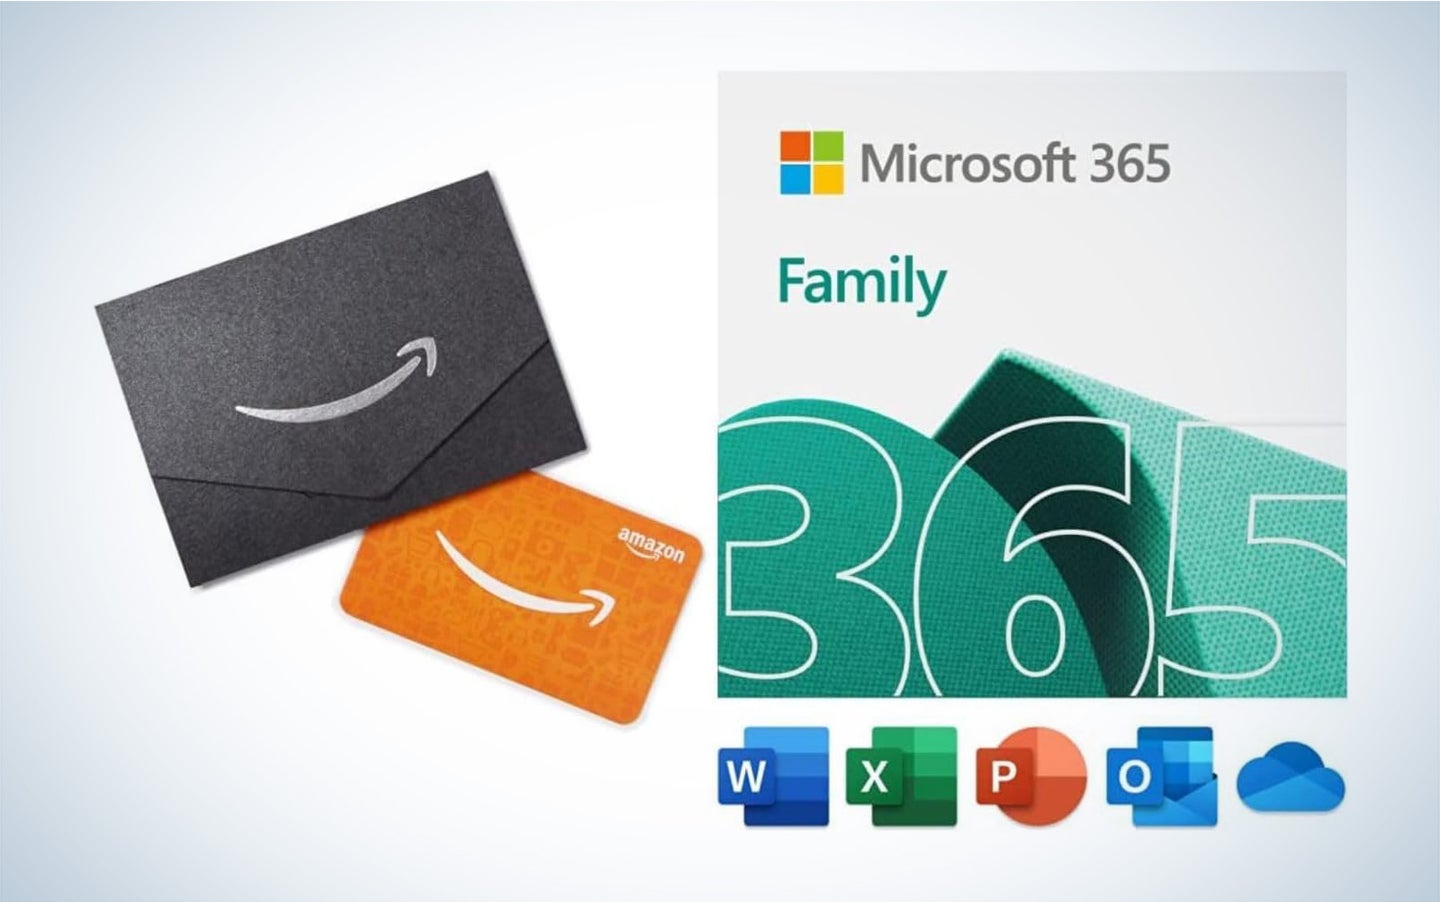 Microsoft Office Prime Day deal with gift cards